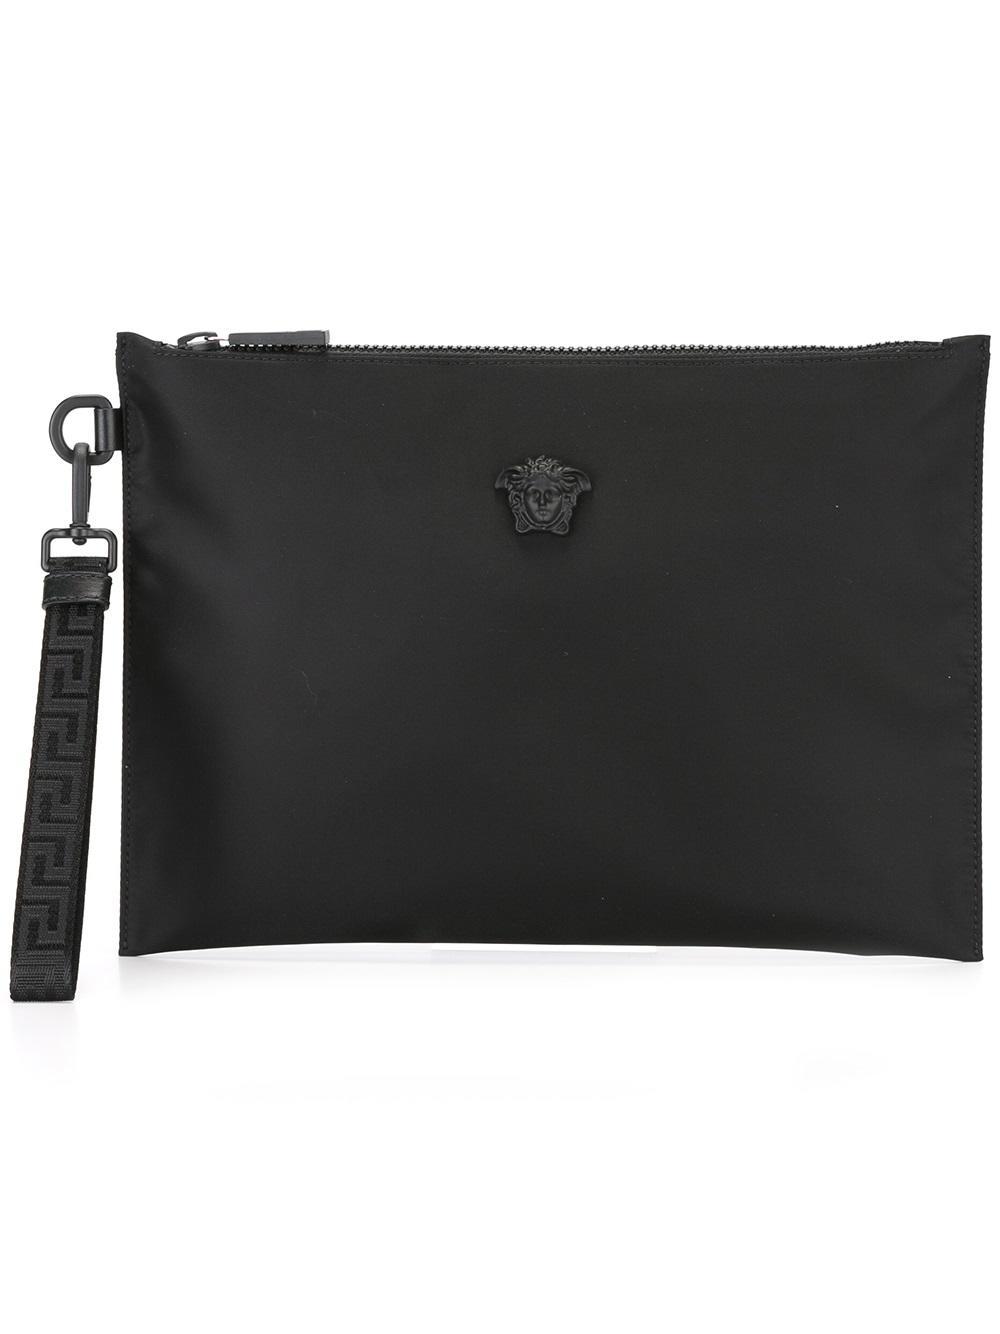 Versace Synthetic Palazzo Medusa Wristlet Clutch Bag in Black for Men ...